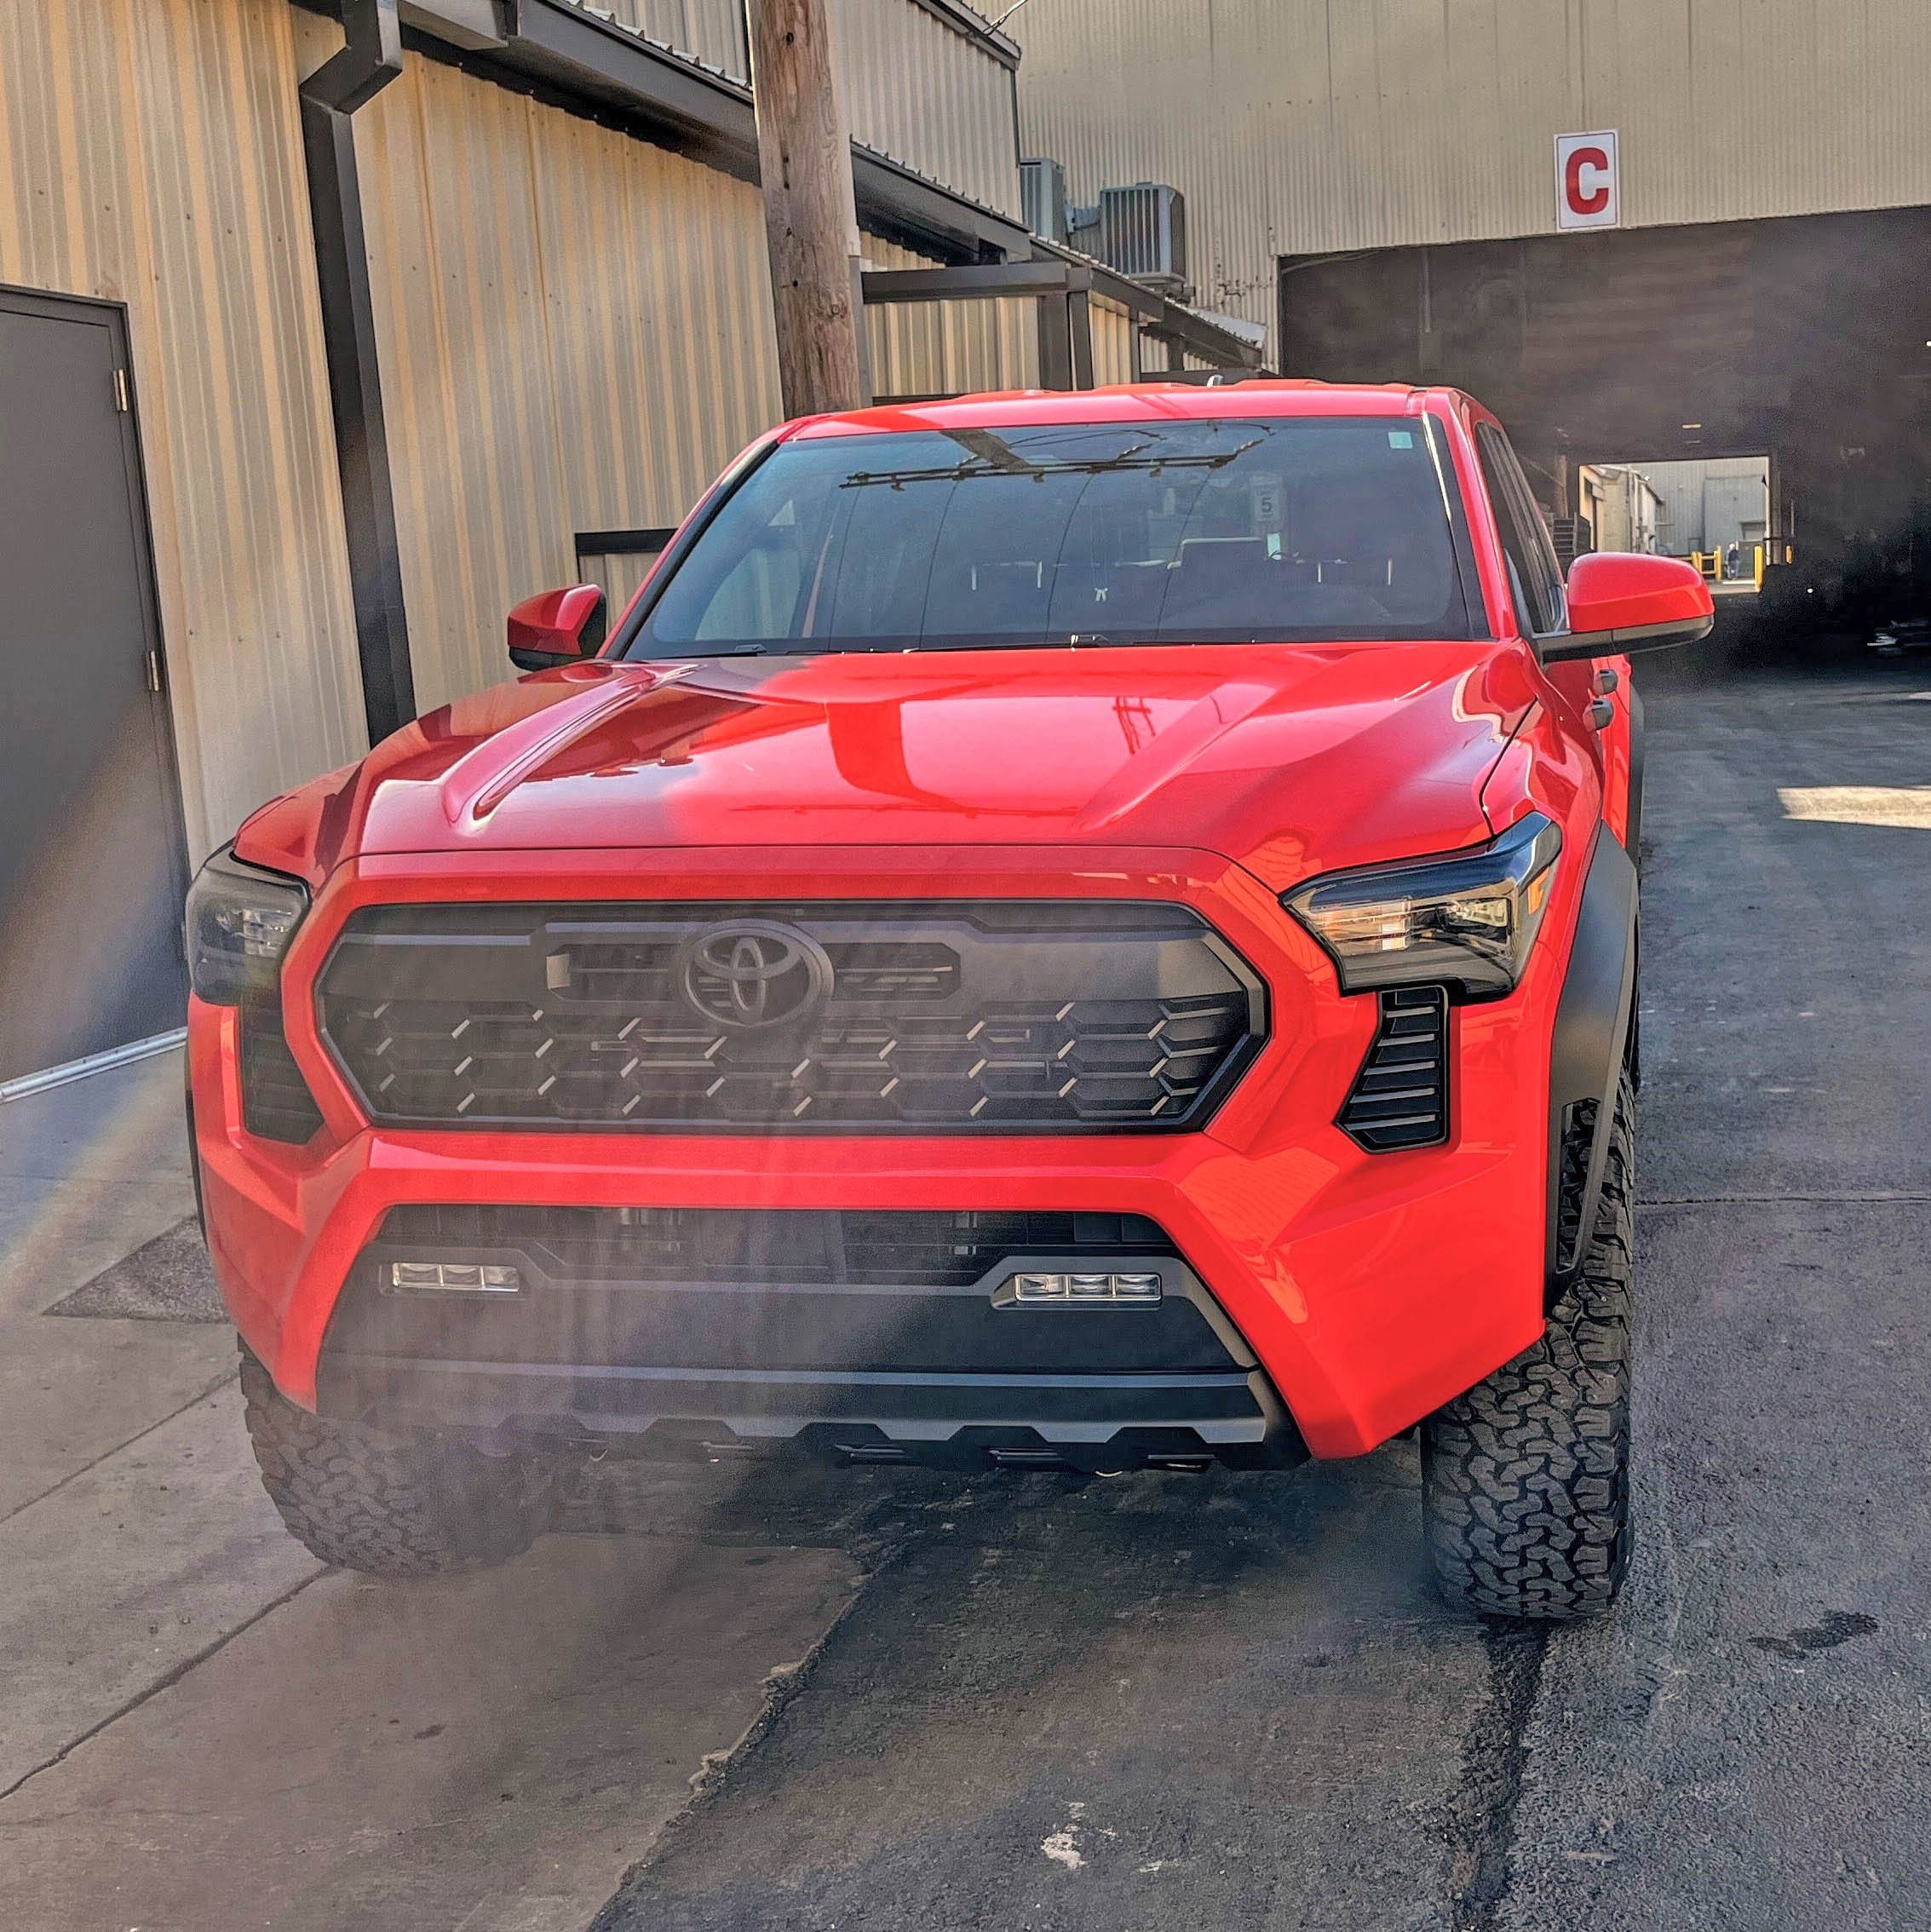 2024 Tacoma 285/70/17 tires (BFG All-Terrain T/A) on stock wheels, no poke, no trim, no cab mount removal (2024 TRD Off-Road) 285-70-17 tires stock factory wheels 2024 Tacoma TRD Off-Road  2